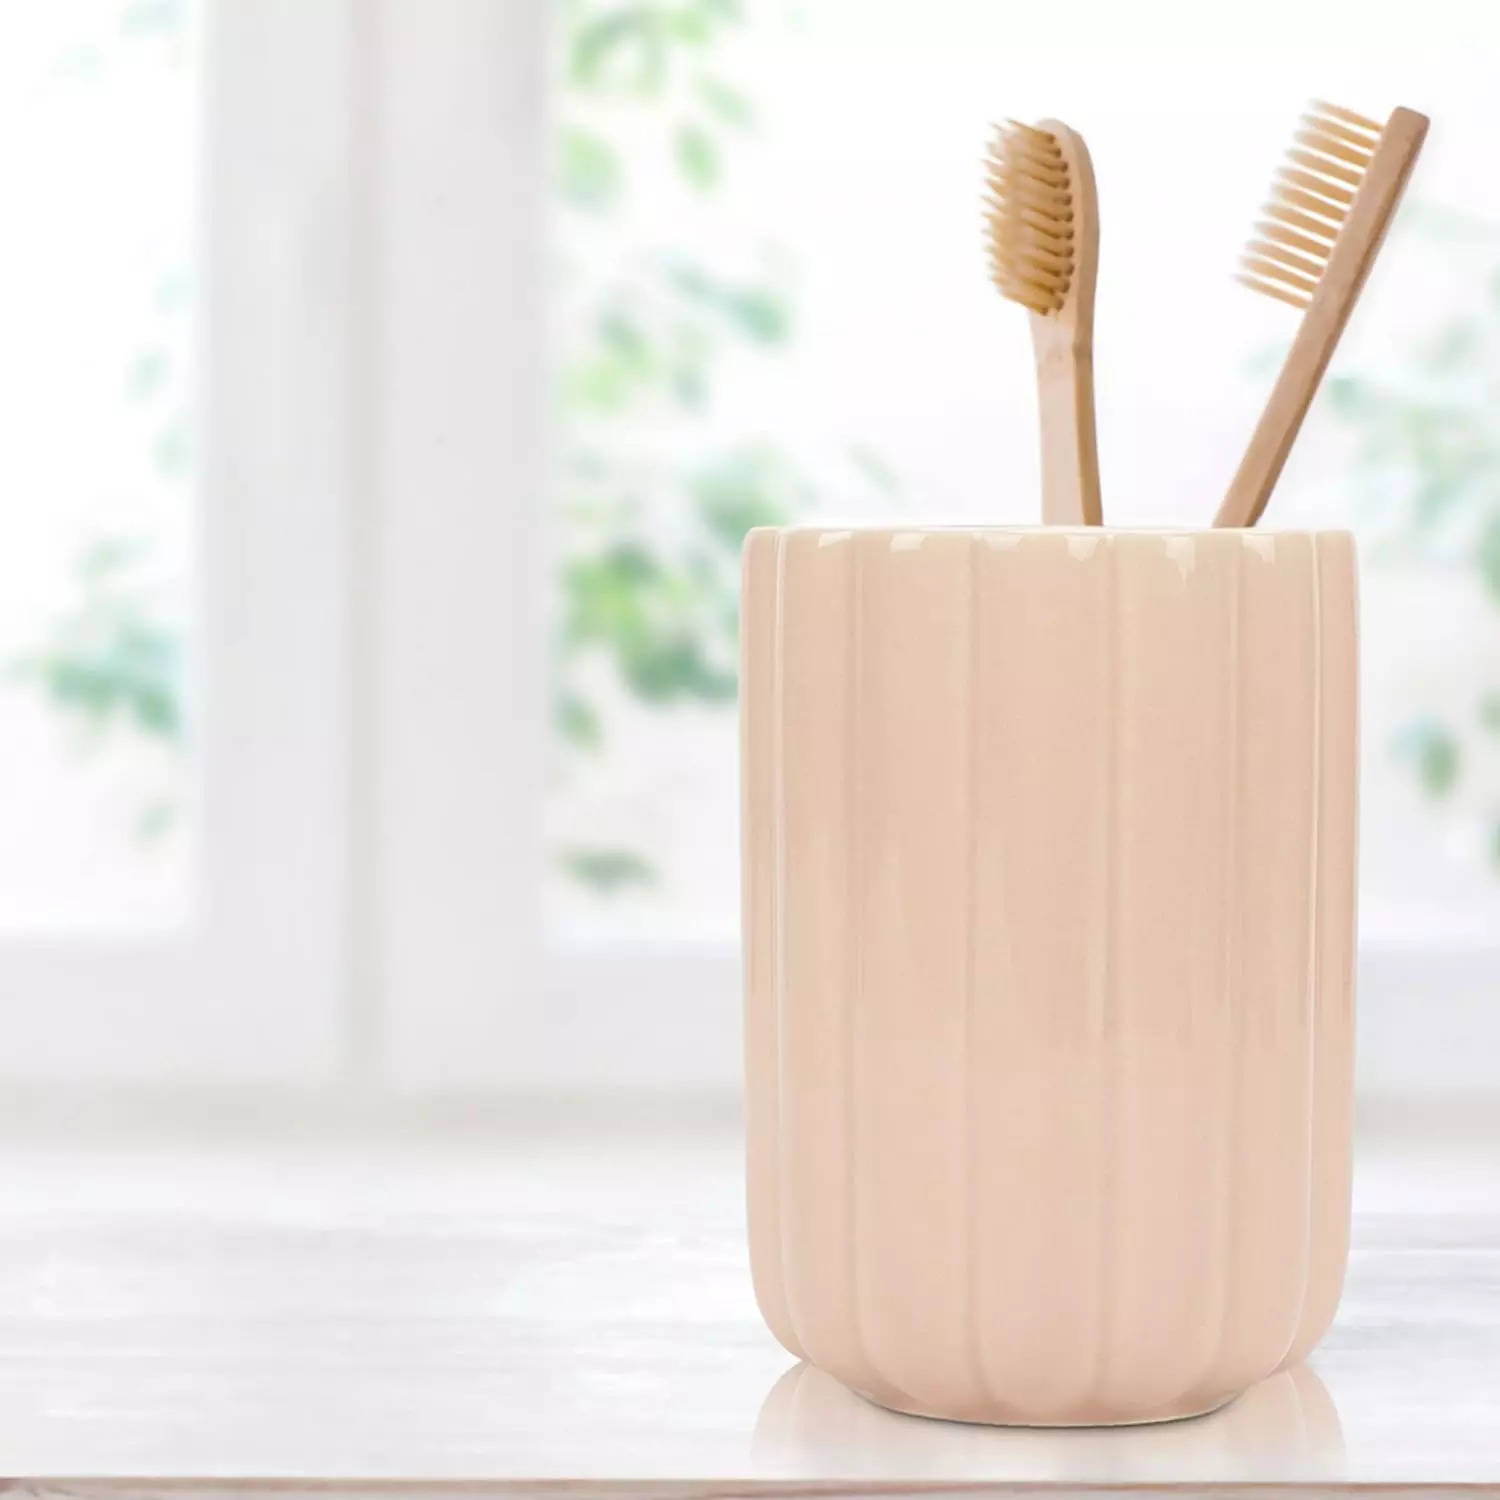 Best ceramic toothbrush holders for your bathroom:Image